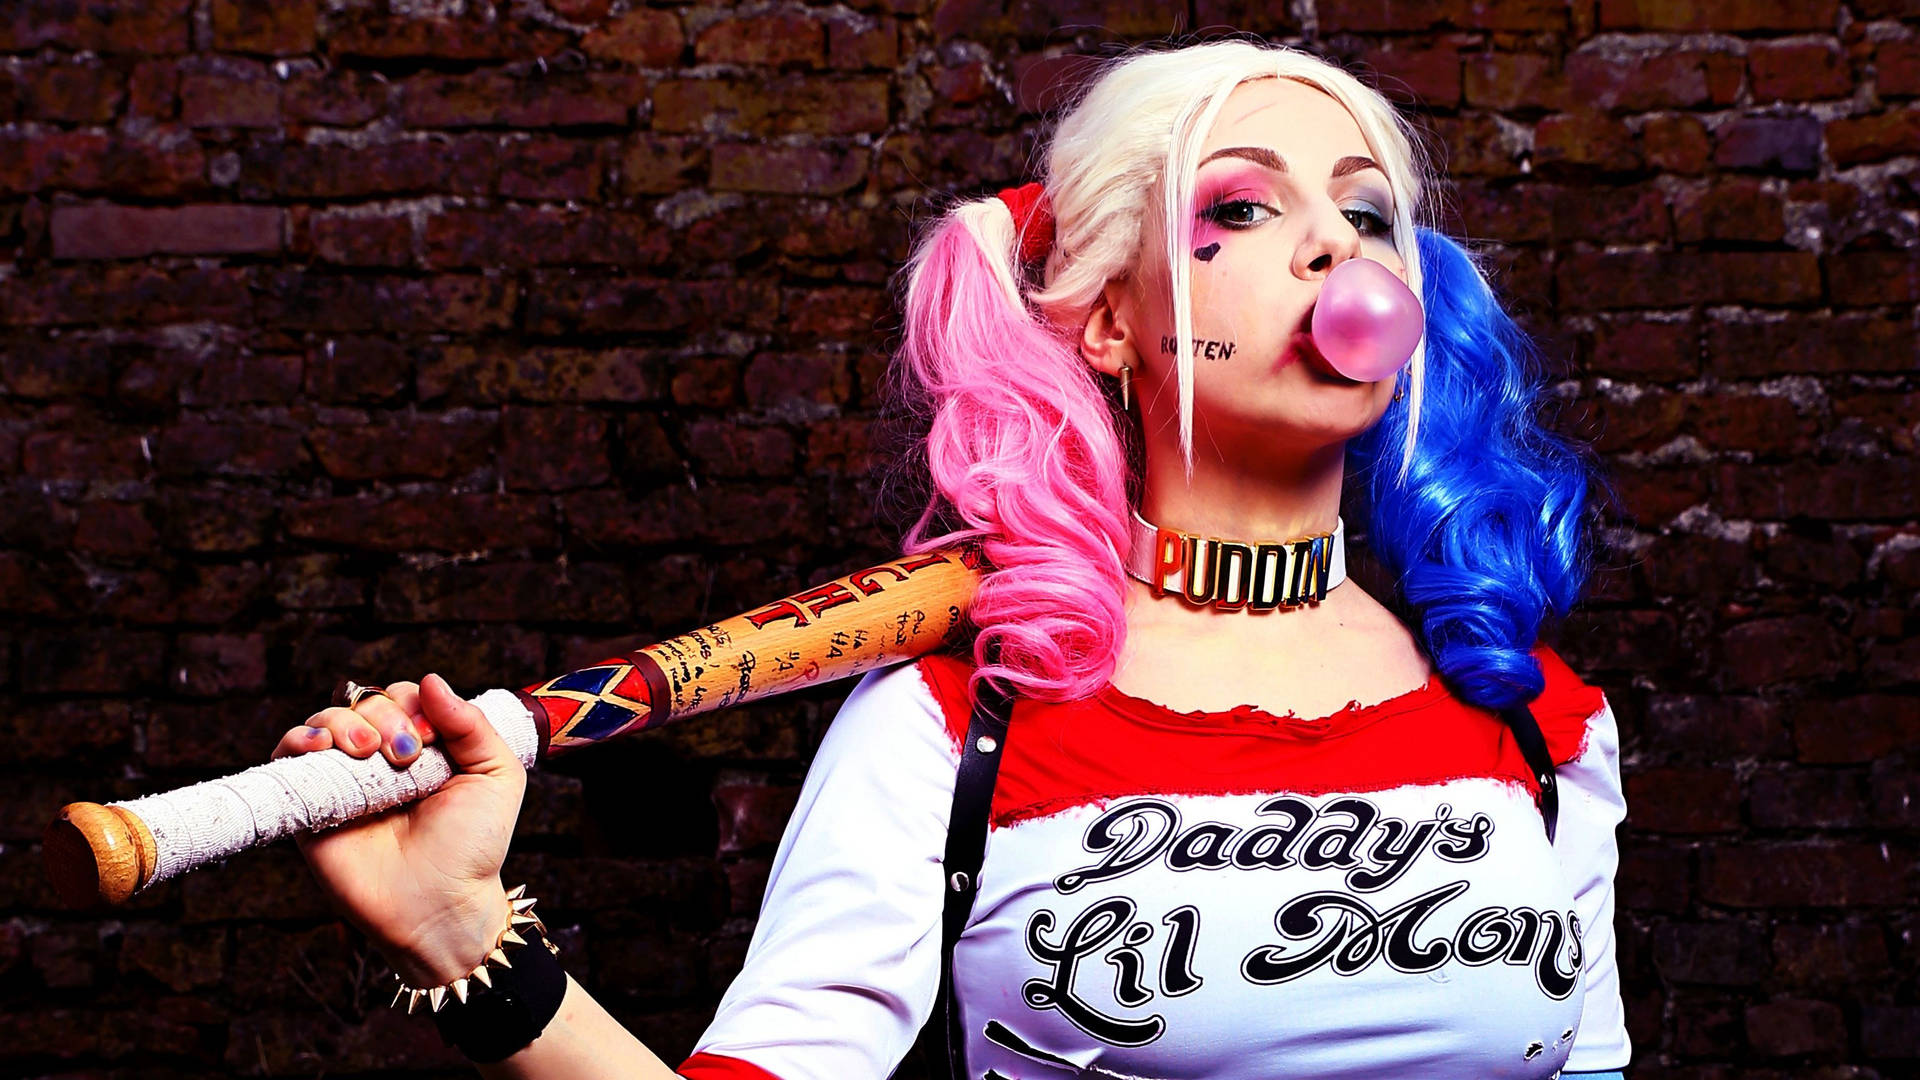 A cosplayer dressed as the iconic DC Comic character, Harley Quinn. Wallpaper